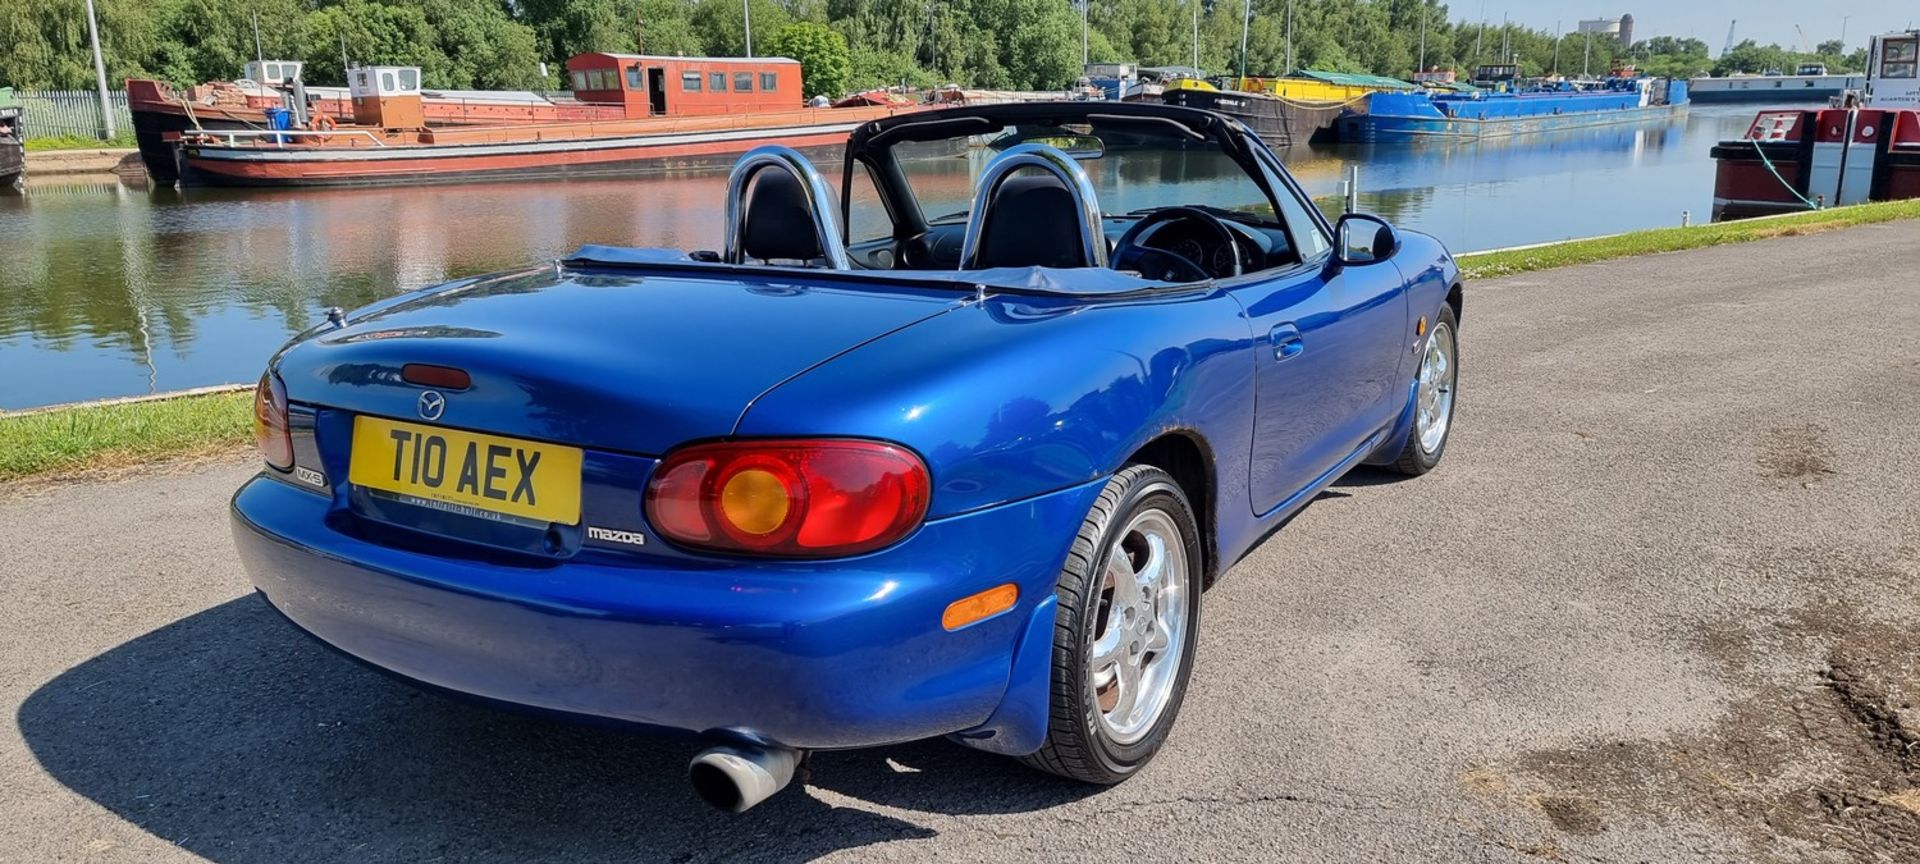 1999 Mazda MX5 10th Anniversary, 1800cc. Registration number T10AEX. Chassis number - Image 6 of 16